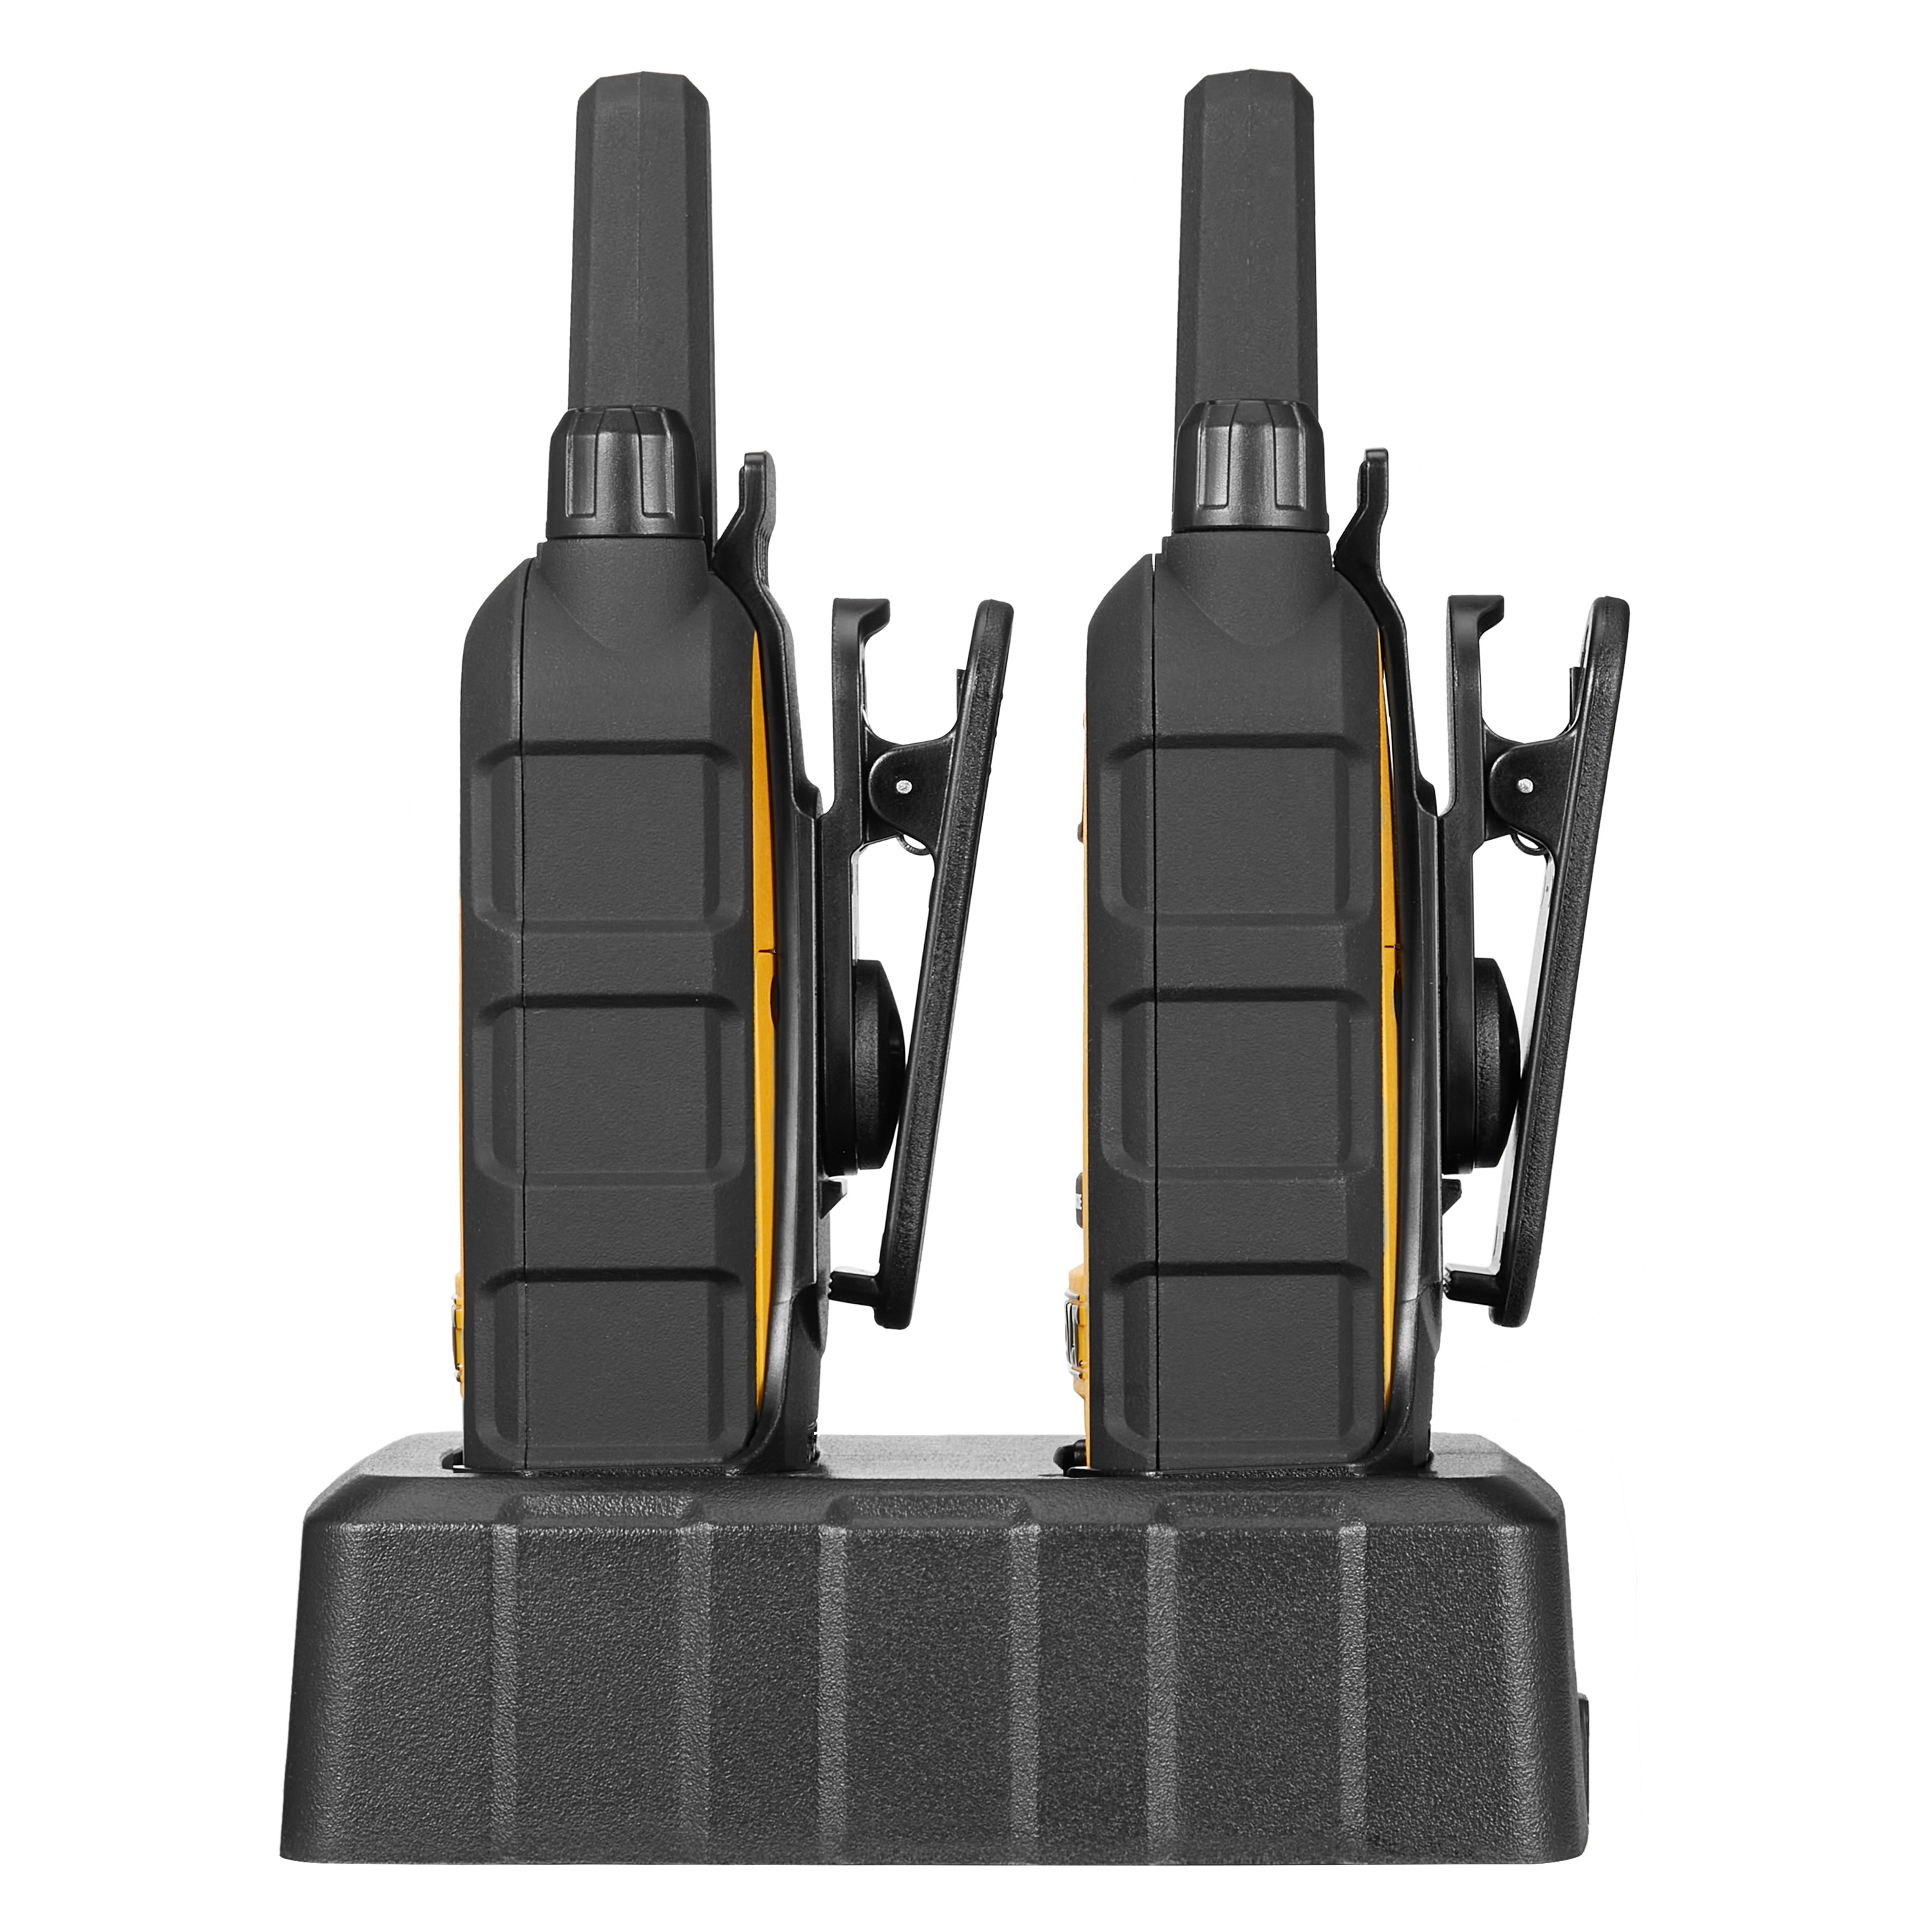 DeWalt DXFRS300 Rechargeable Two-Way Radio Pack